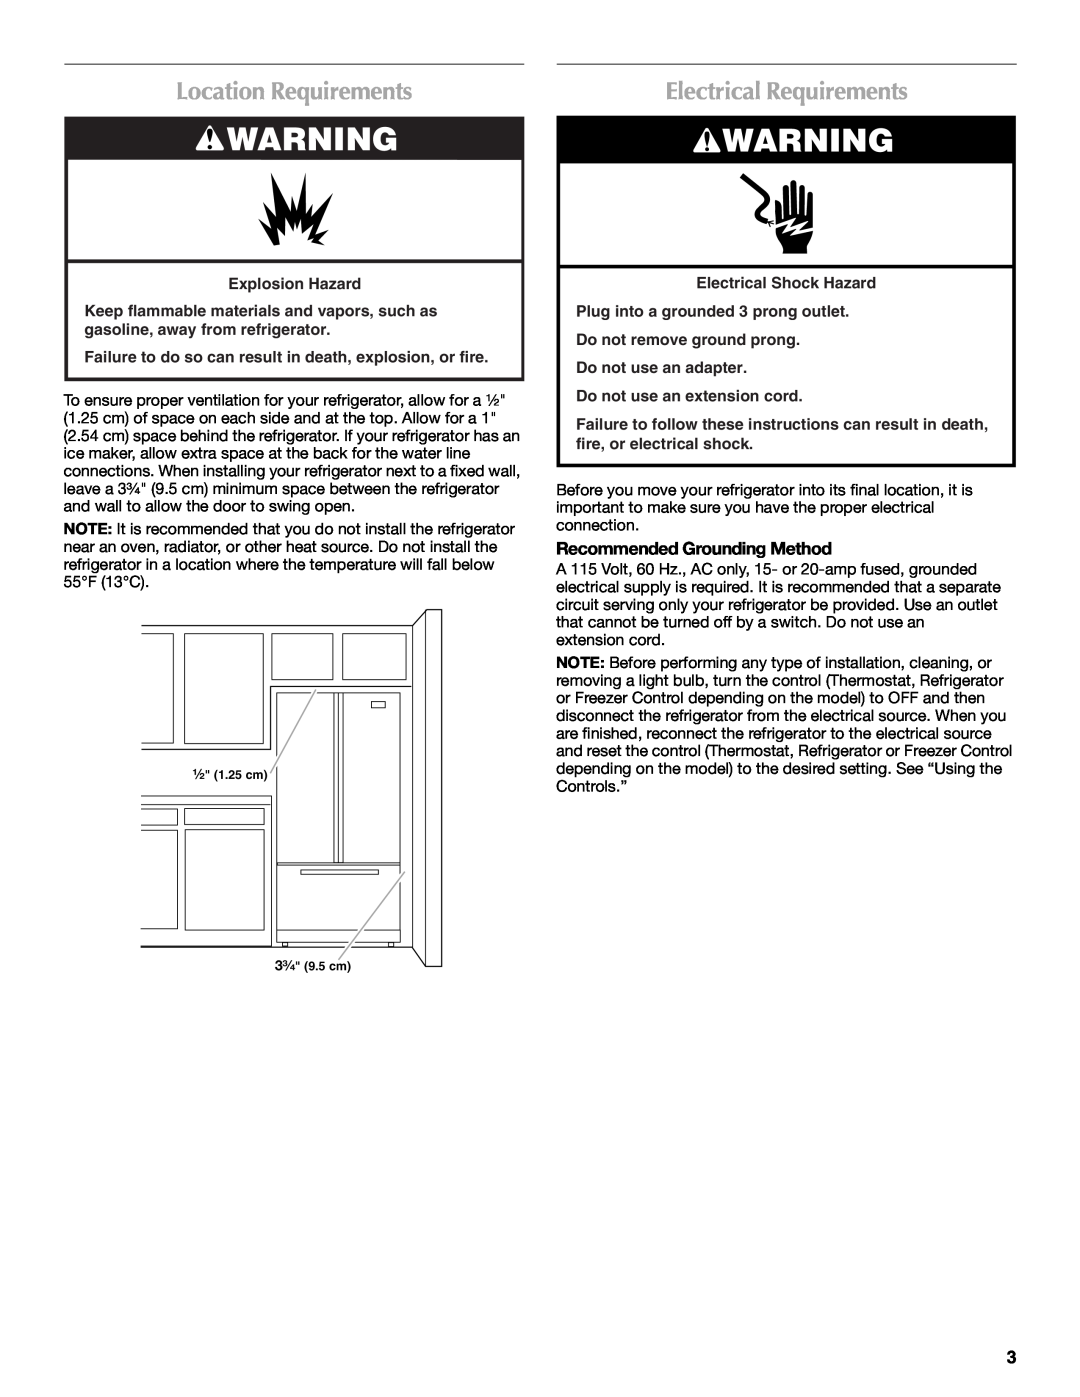 Maytag MFI2269VEM Location Requirements, Electrical Requirements, Recommended Grounding Method, Explosion Hazard 